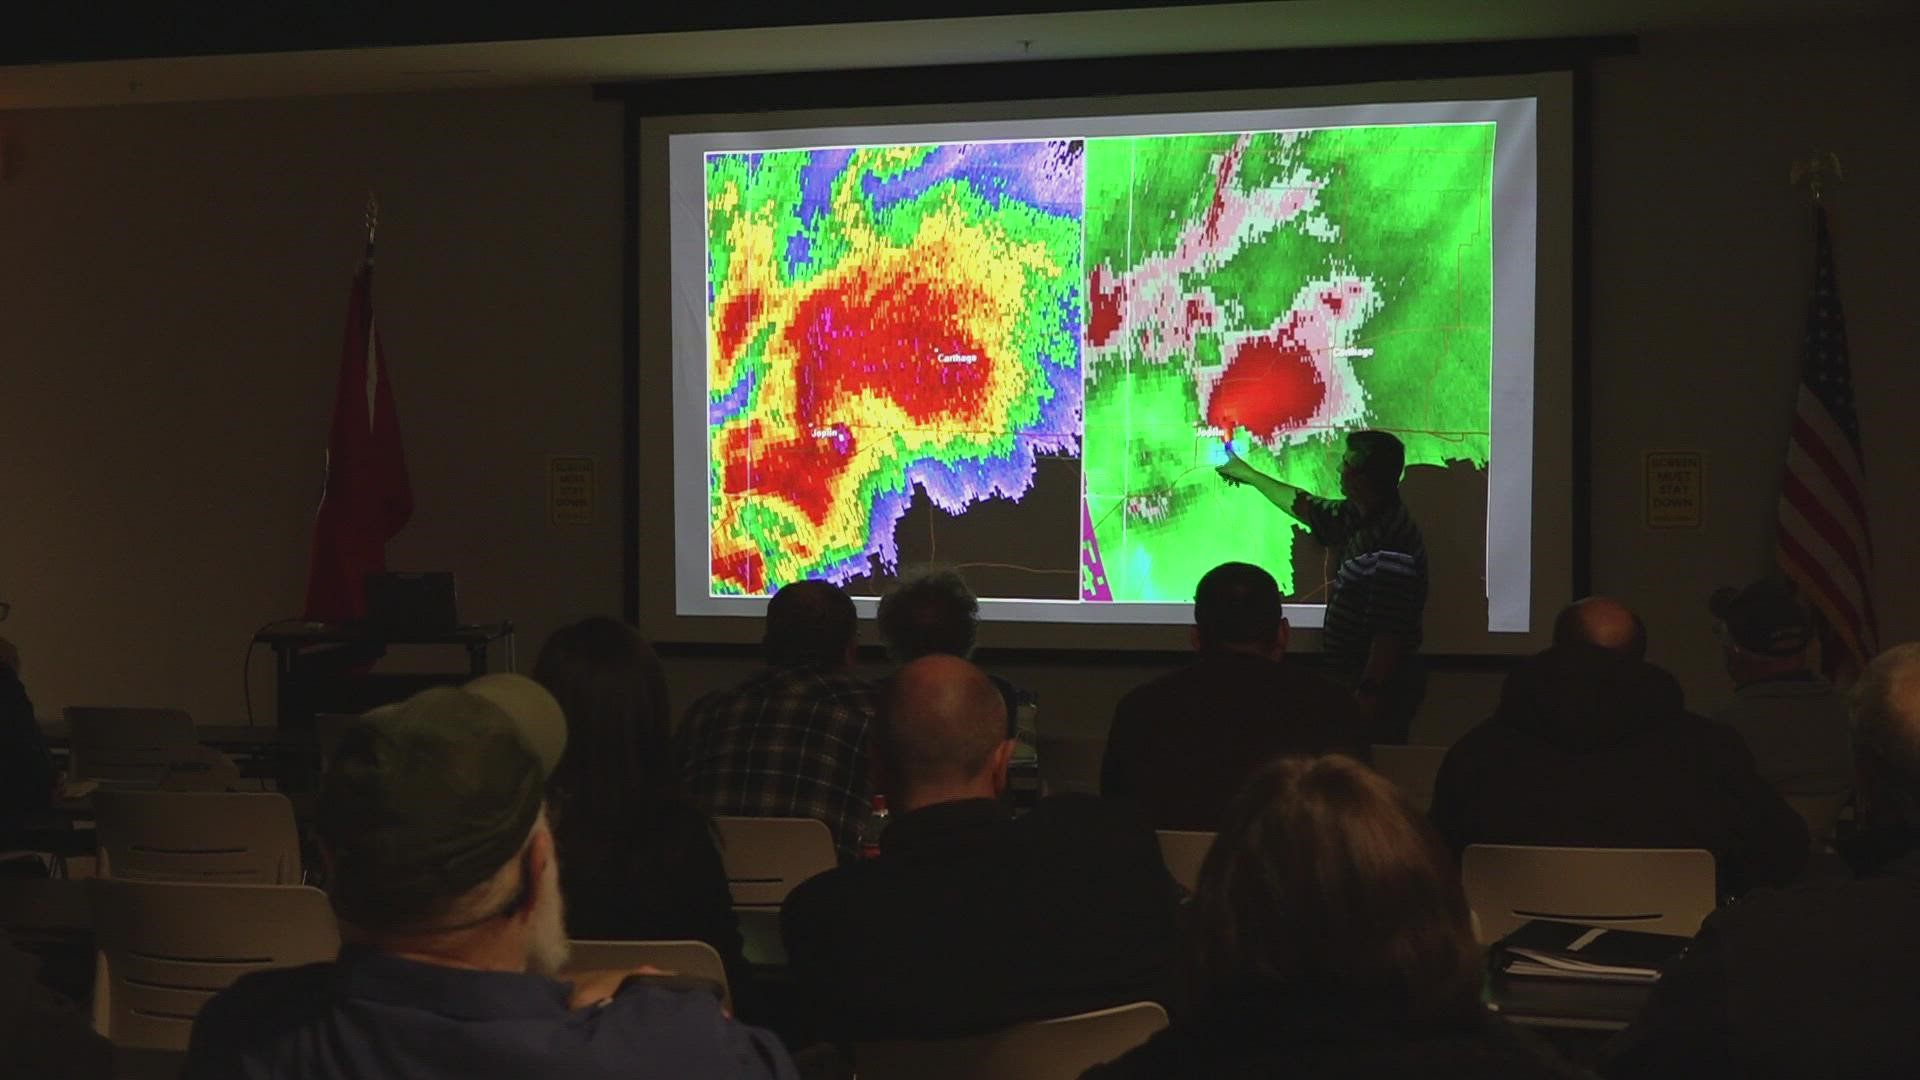 The volunteer program shows people how to spot severe thunderstorms and how to report information that the NWS can use to provide accurate warnings for tornadoes.